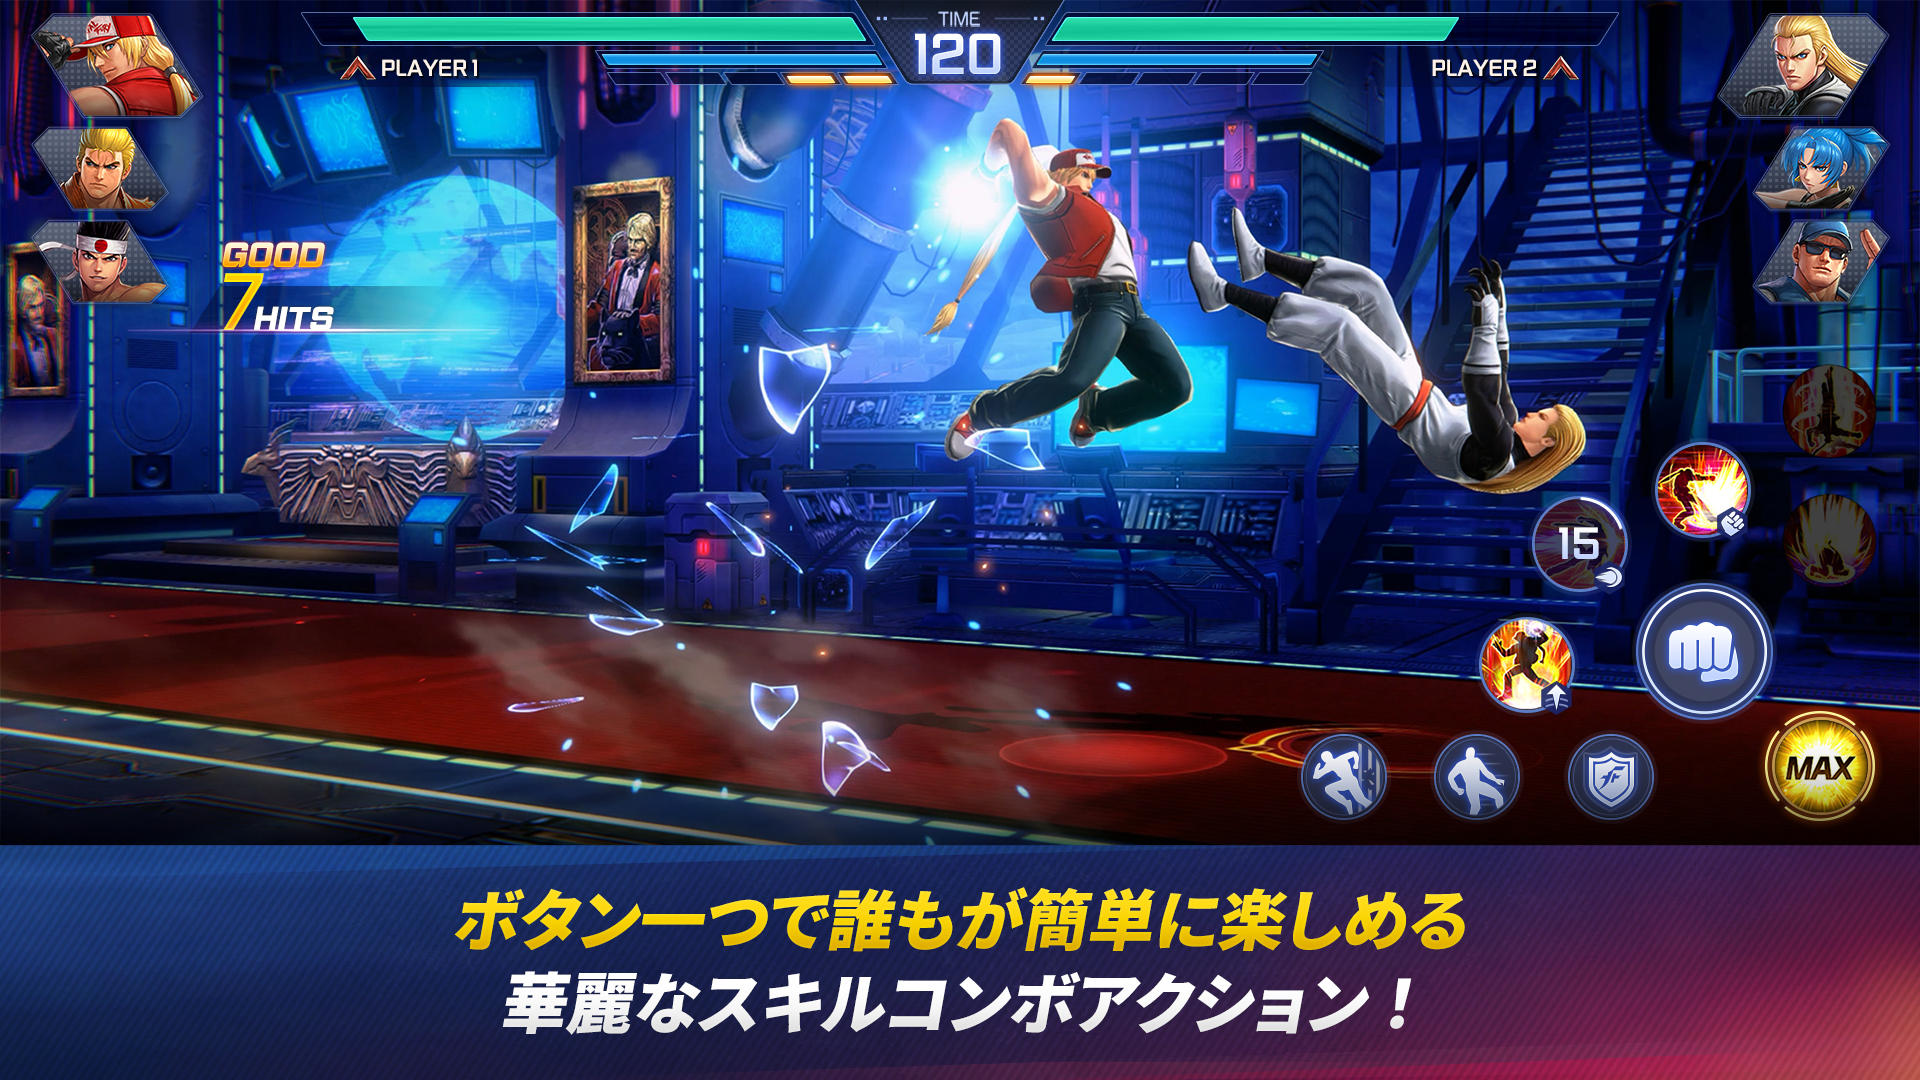 The King of Fighters ARENAのキャプチャ